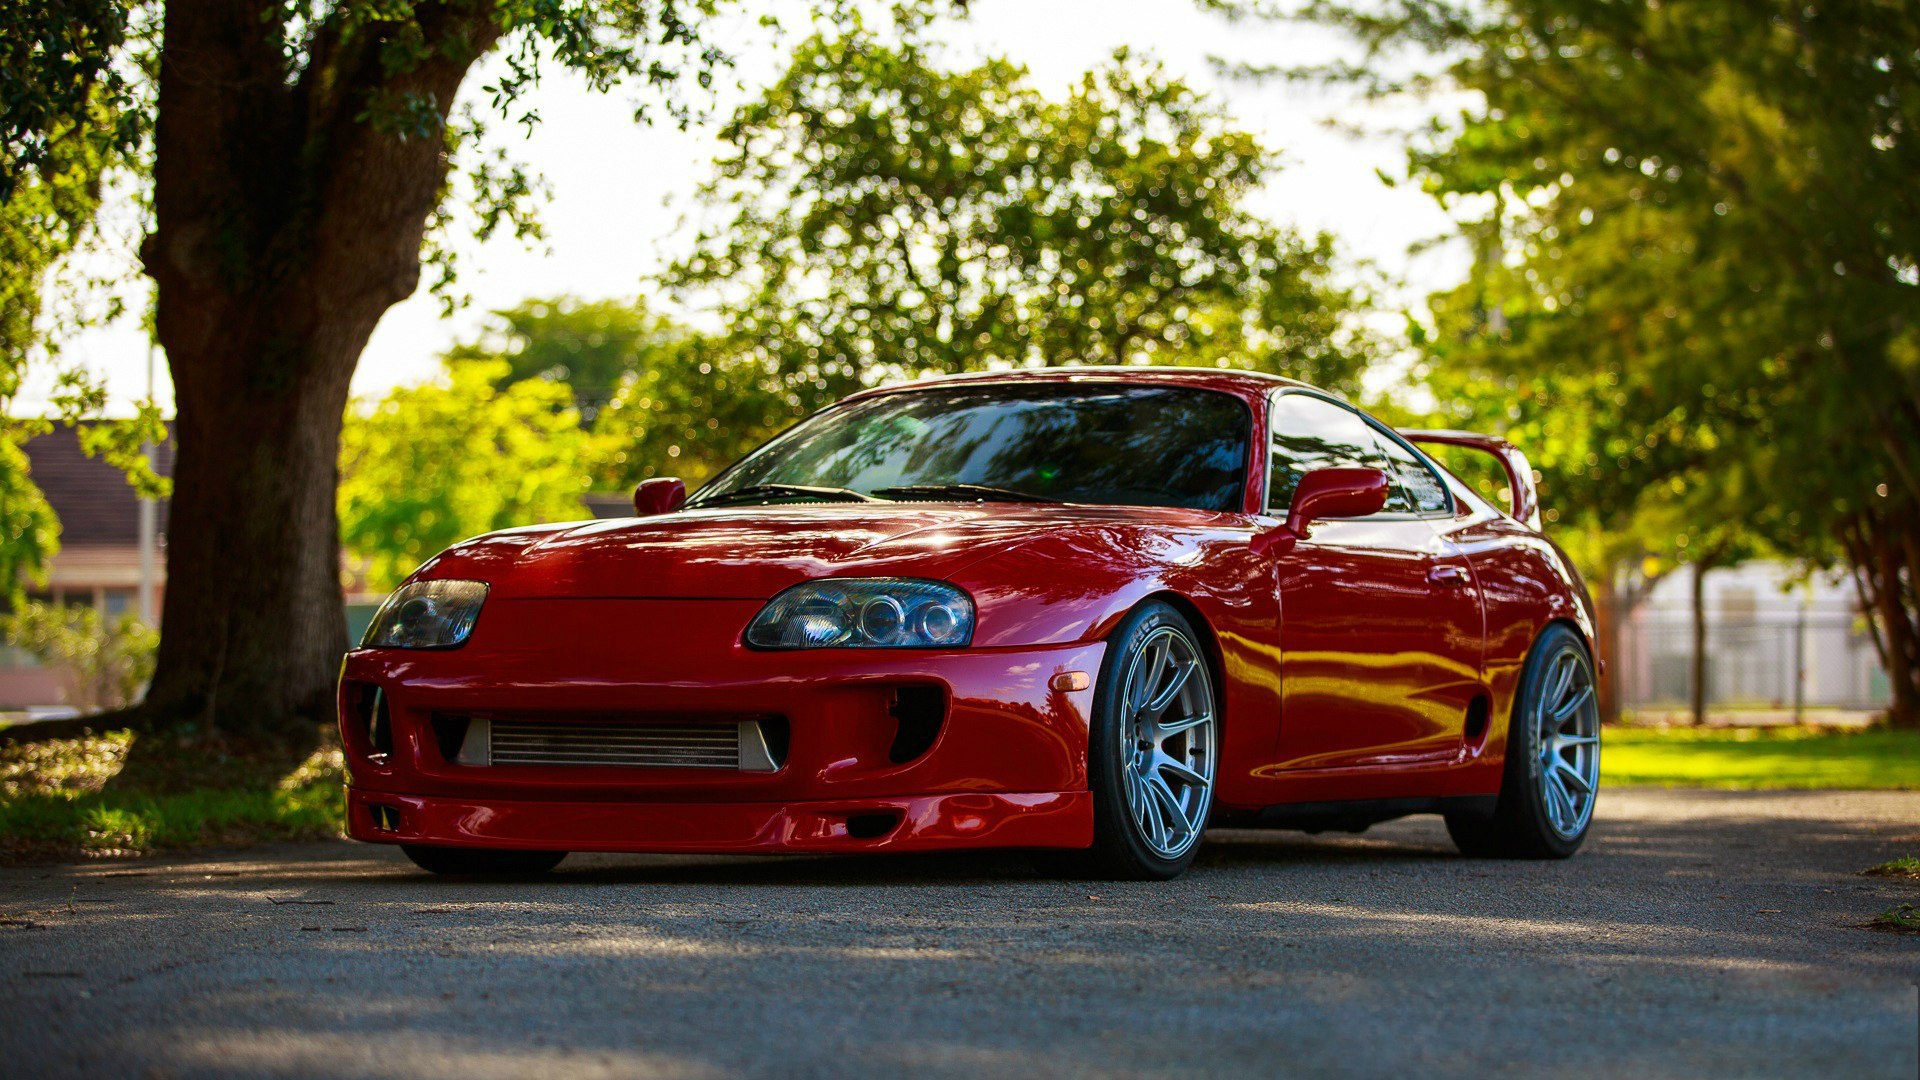 Toyota Supra Wallpaper Image Photos Pictures Background